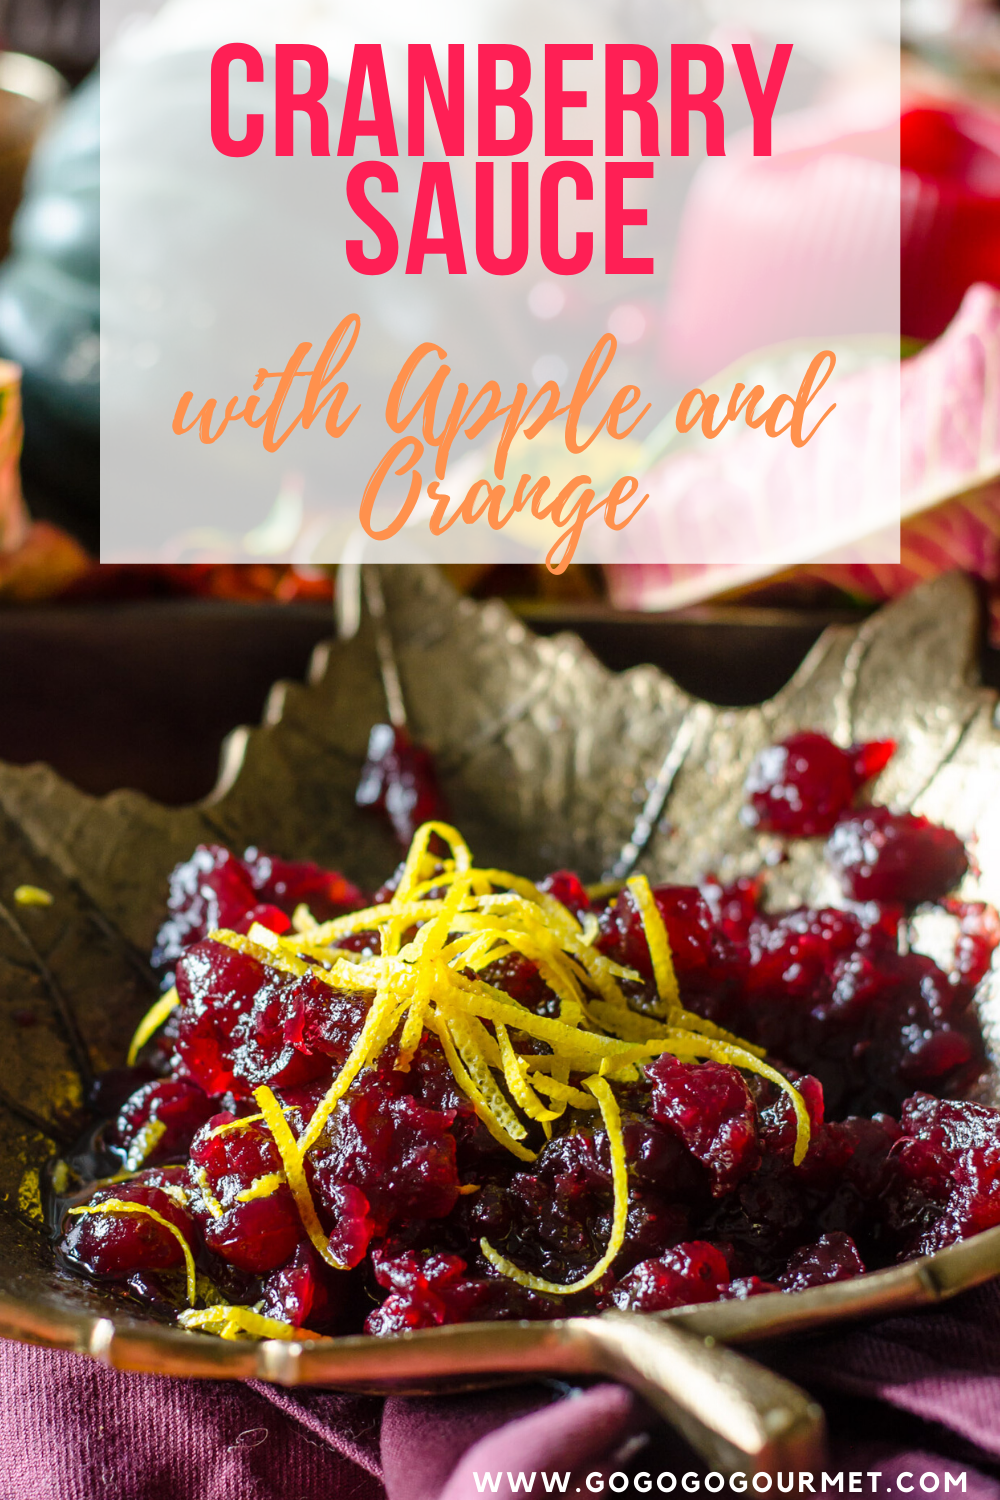 This homemade Cranberry Sauce with Orange Juice and Apple is the perfect dish for Thanksgiving! It's super easy to make, and it's so much better than the jellied, canned stuff! It truly is the best cranberry sauce recipe! #gogogogourmet #cranberrysauce #cranberrysaucerecipe #thanksgivingsides #cranberrysaucewithorangejuice via @gogogogourmet